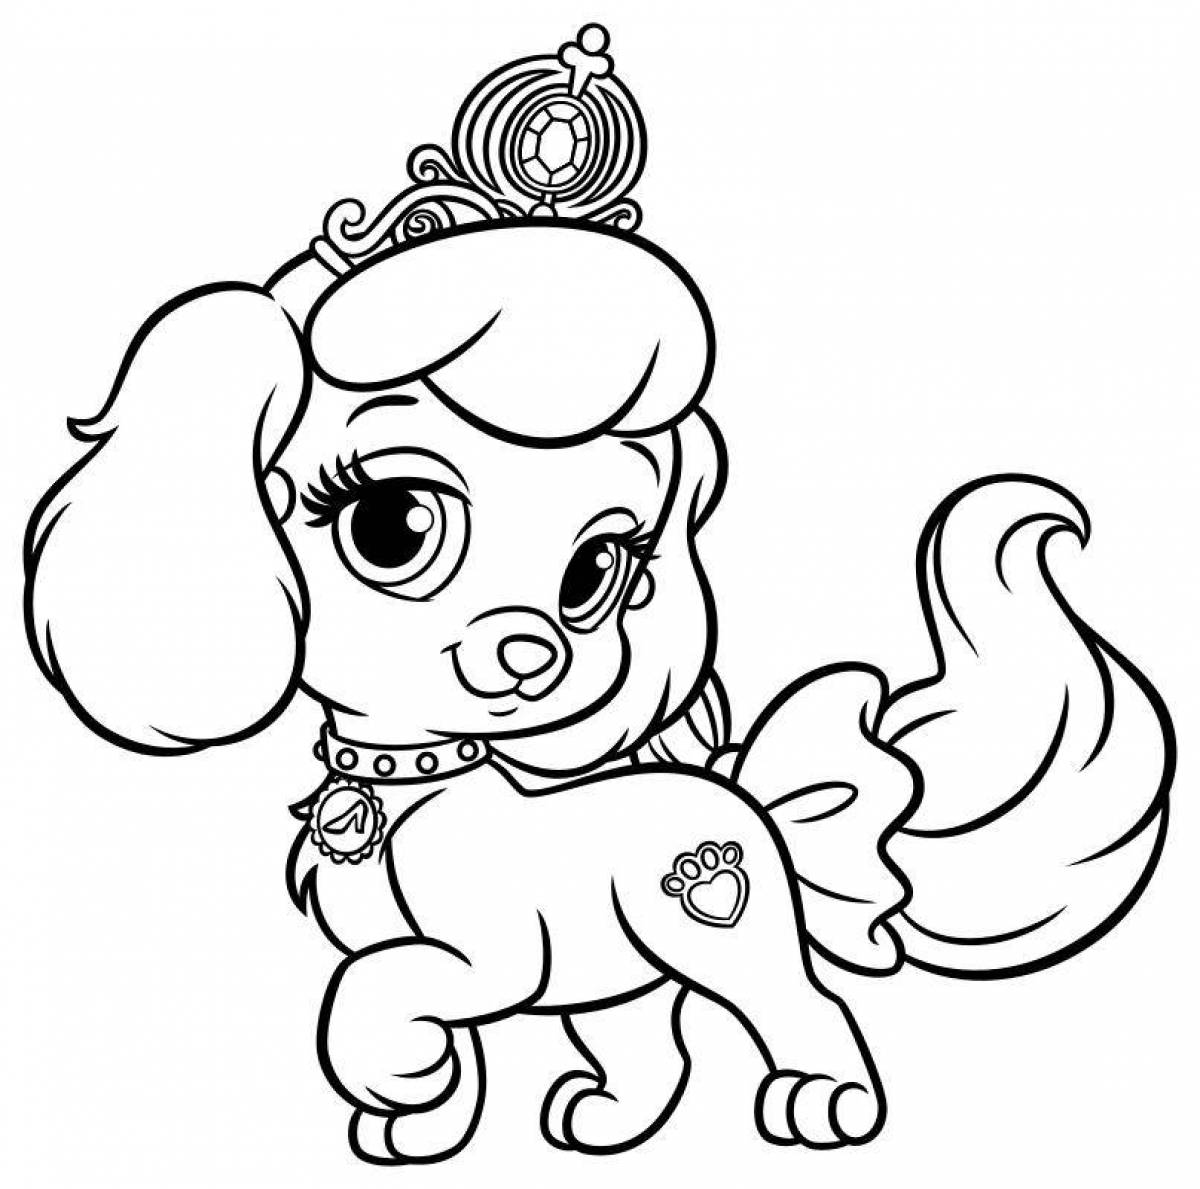 Puppies snuggly coloring page